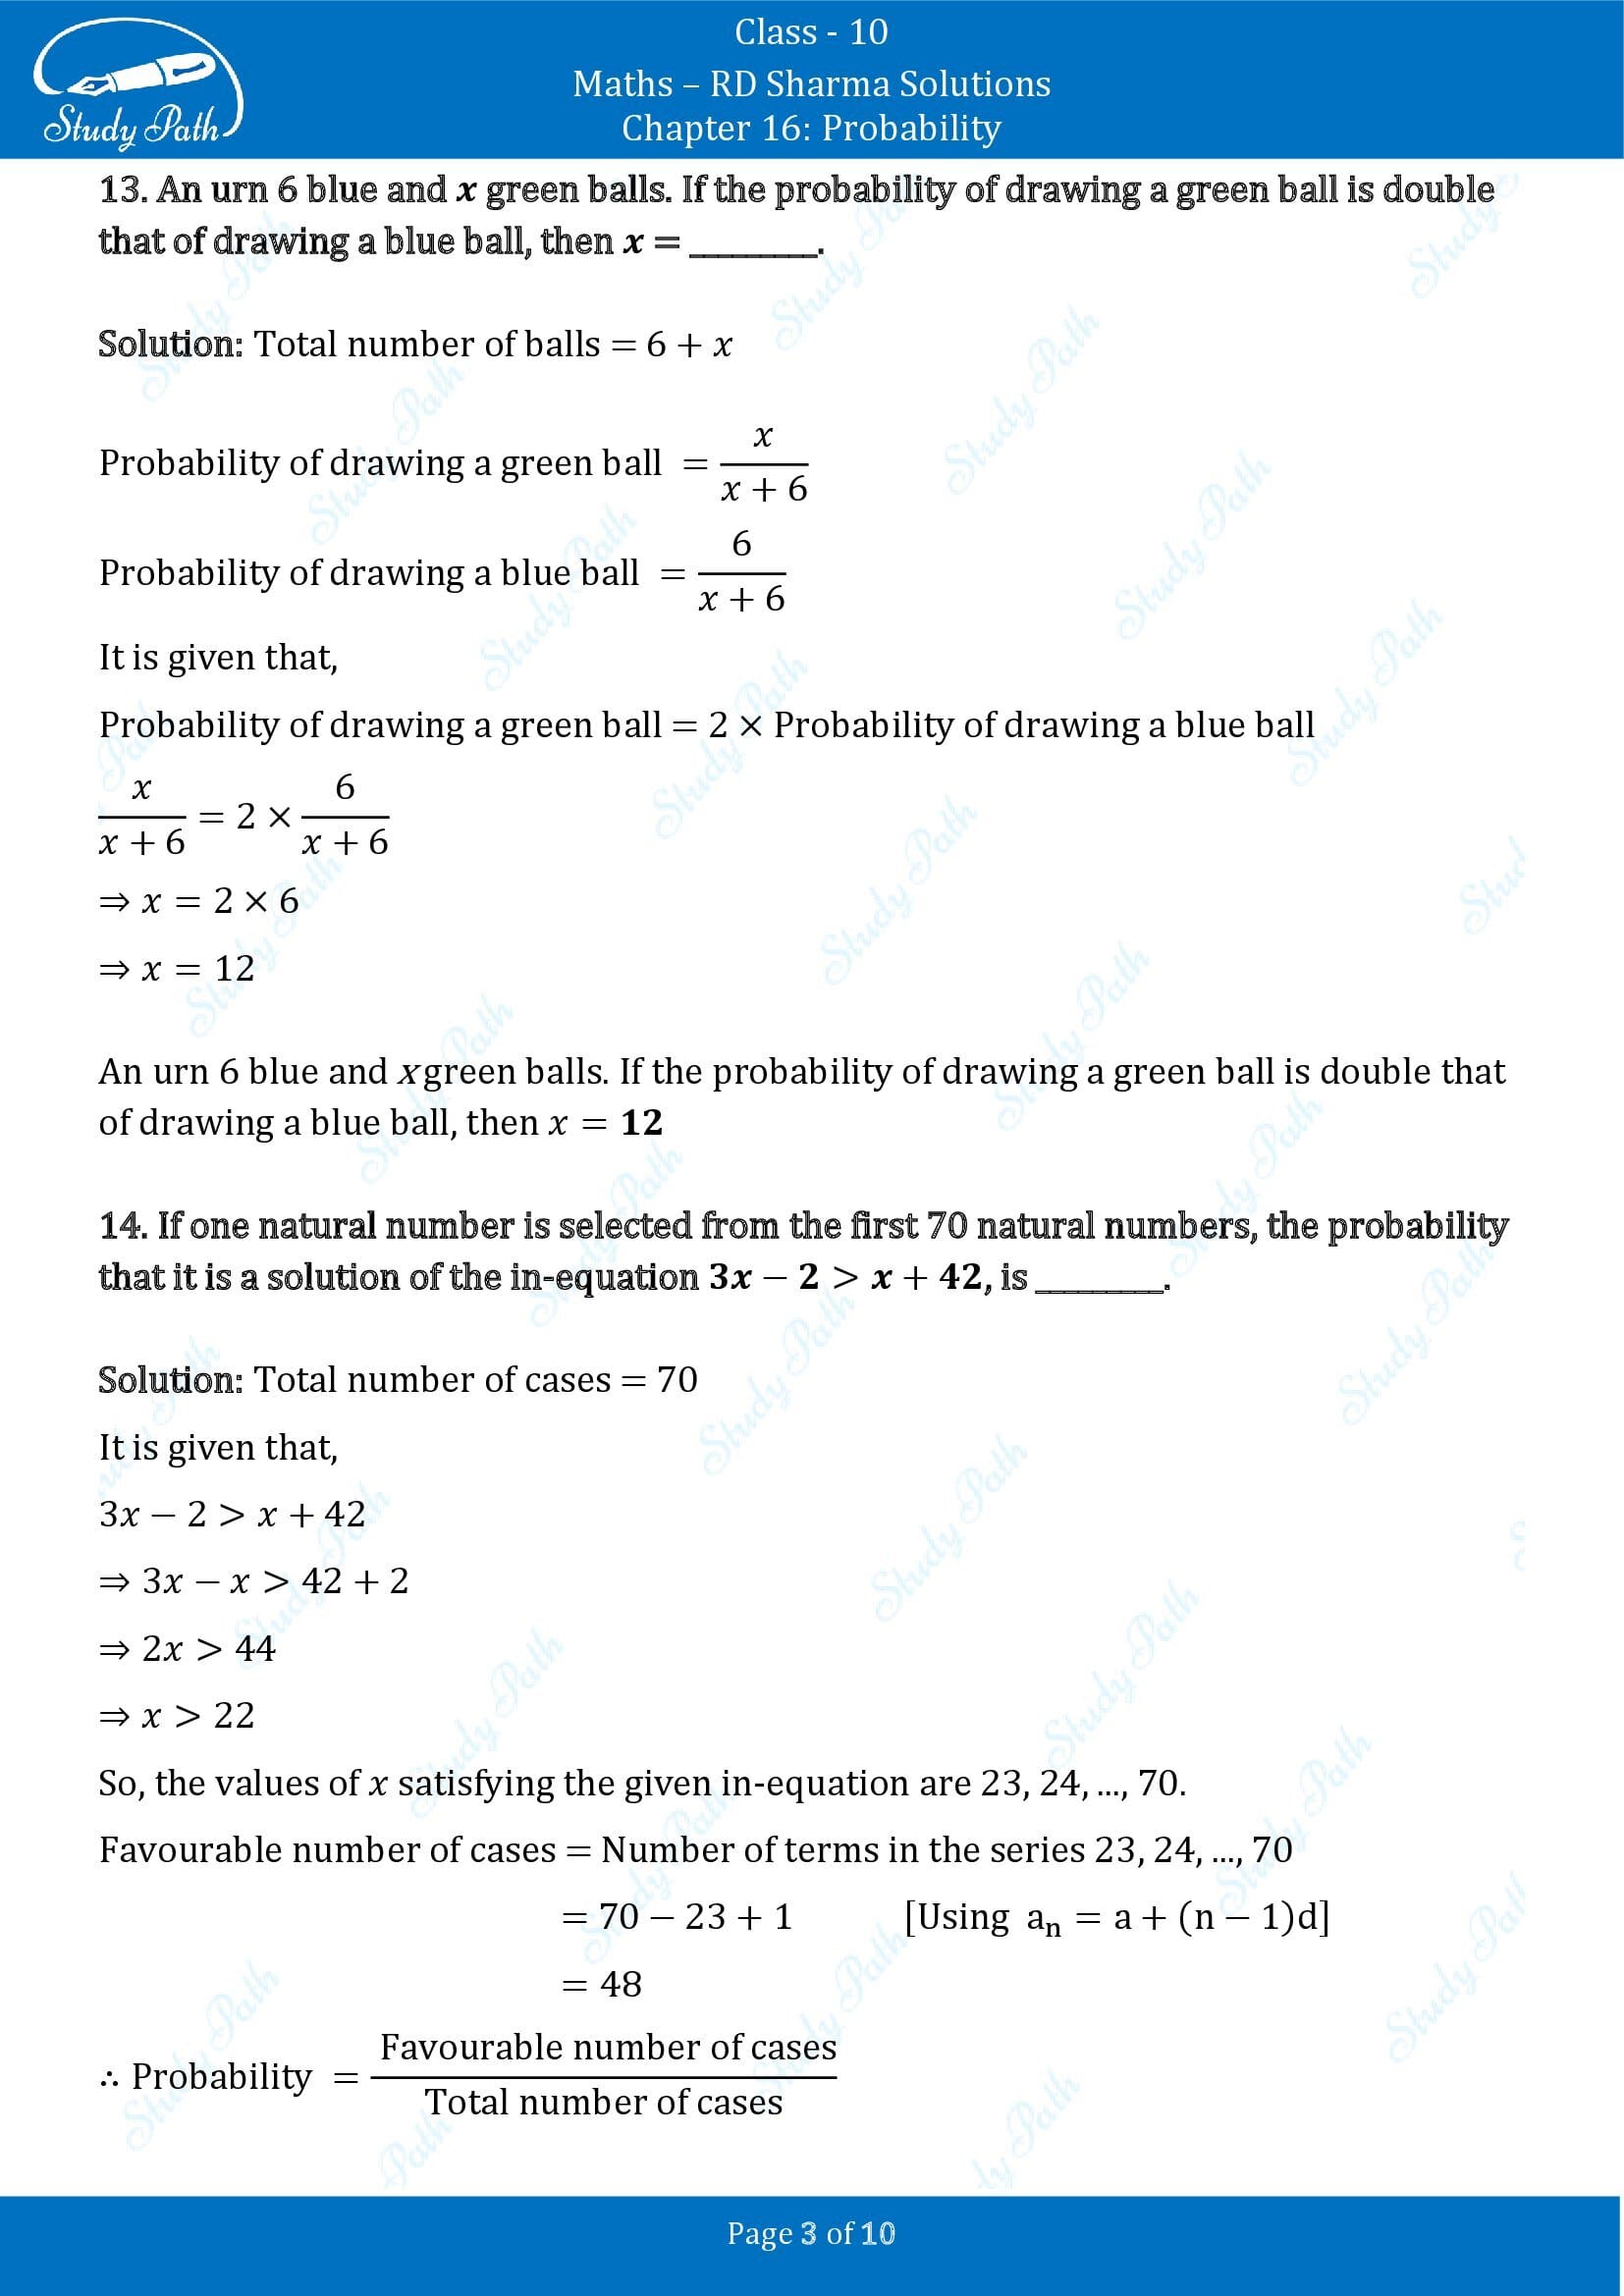 RD Sharma Solutions Class 10 Chapter 16 Probability Fill in the Blank Type Questions FBQs 00003